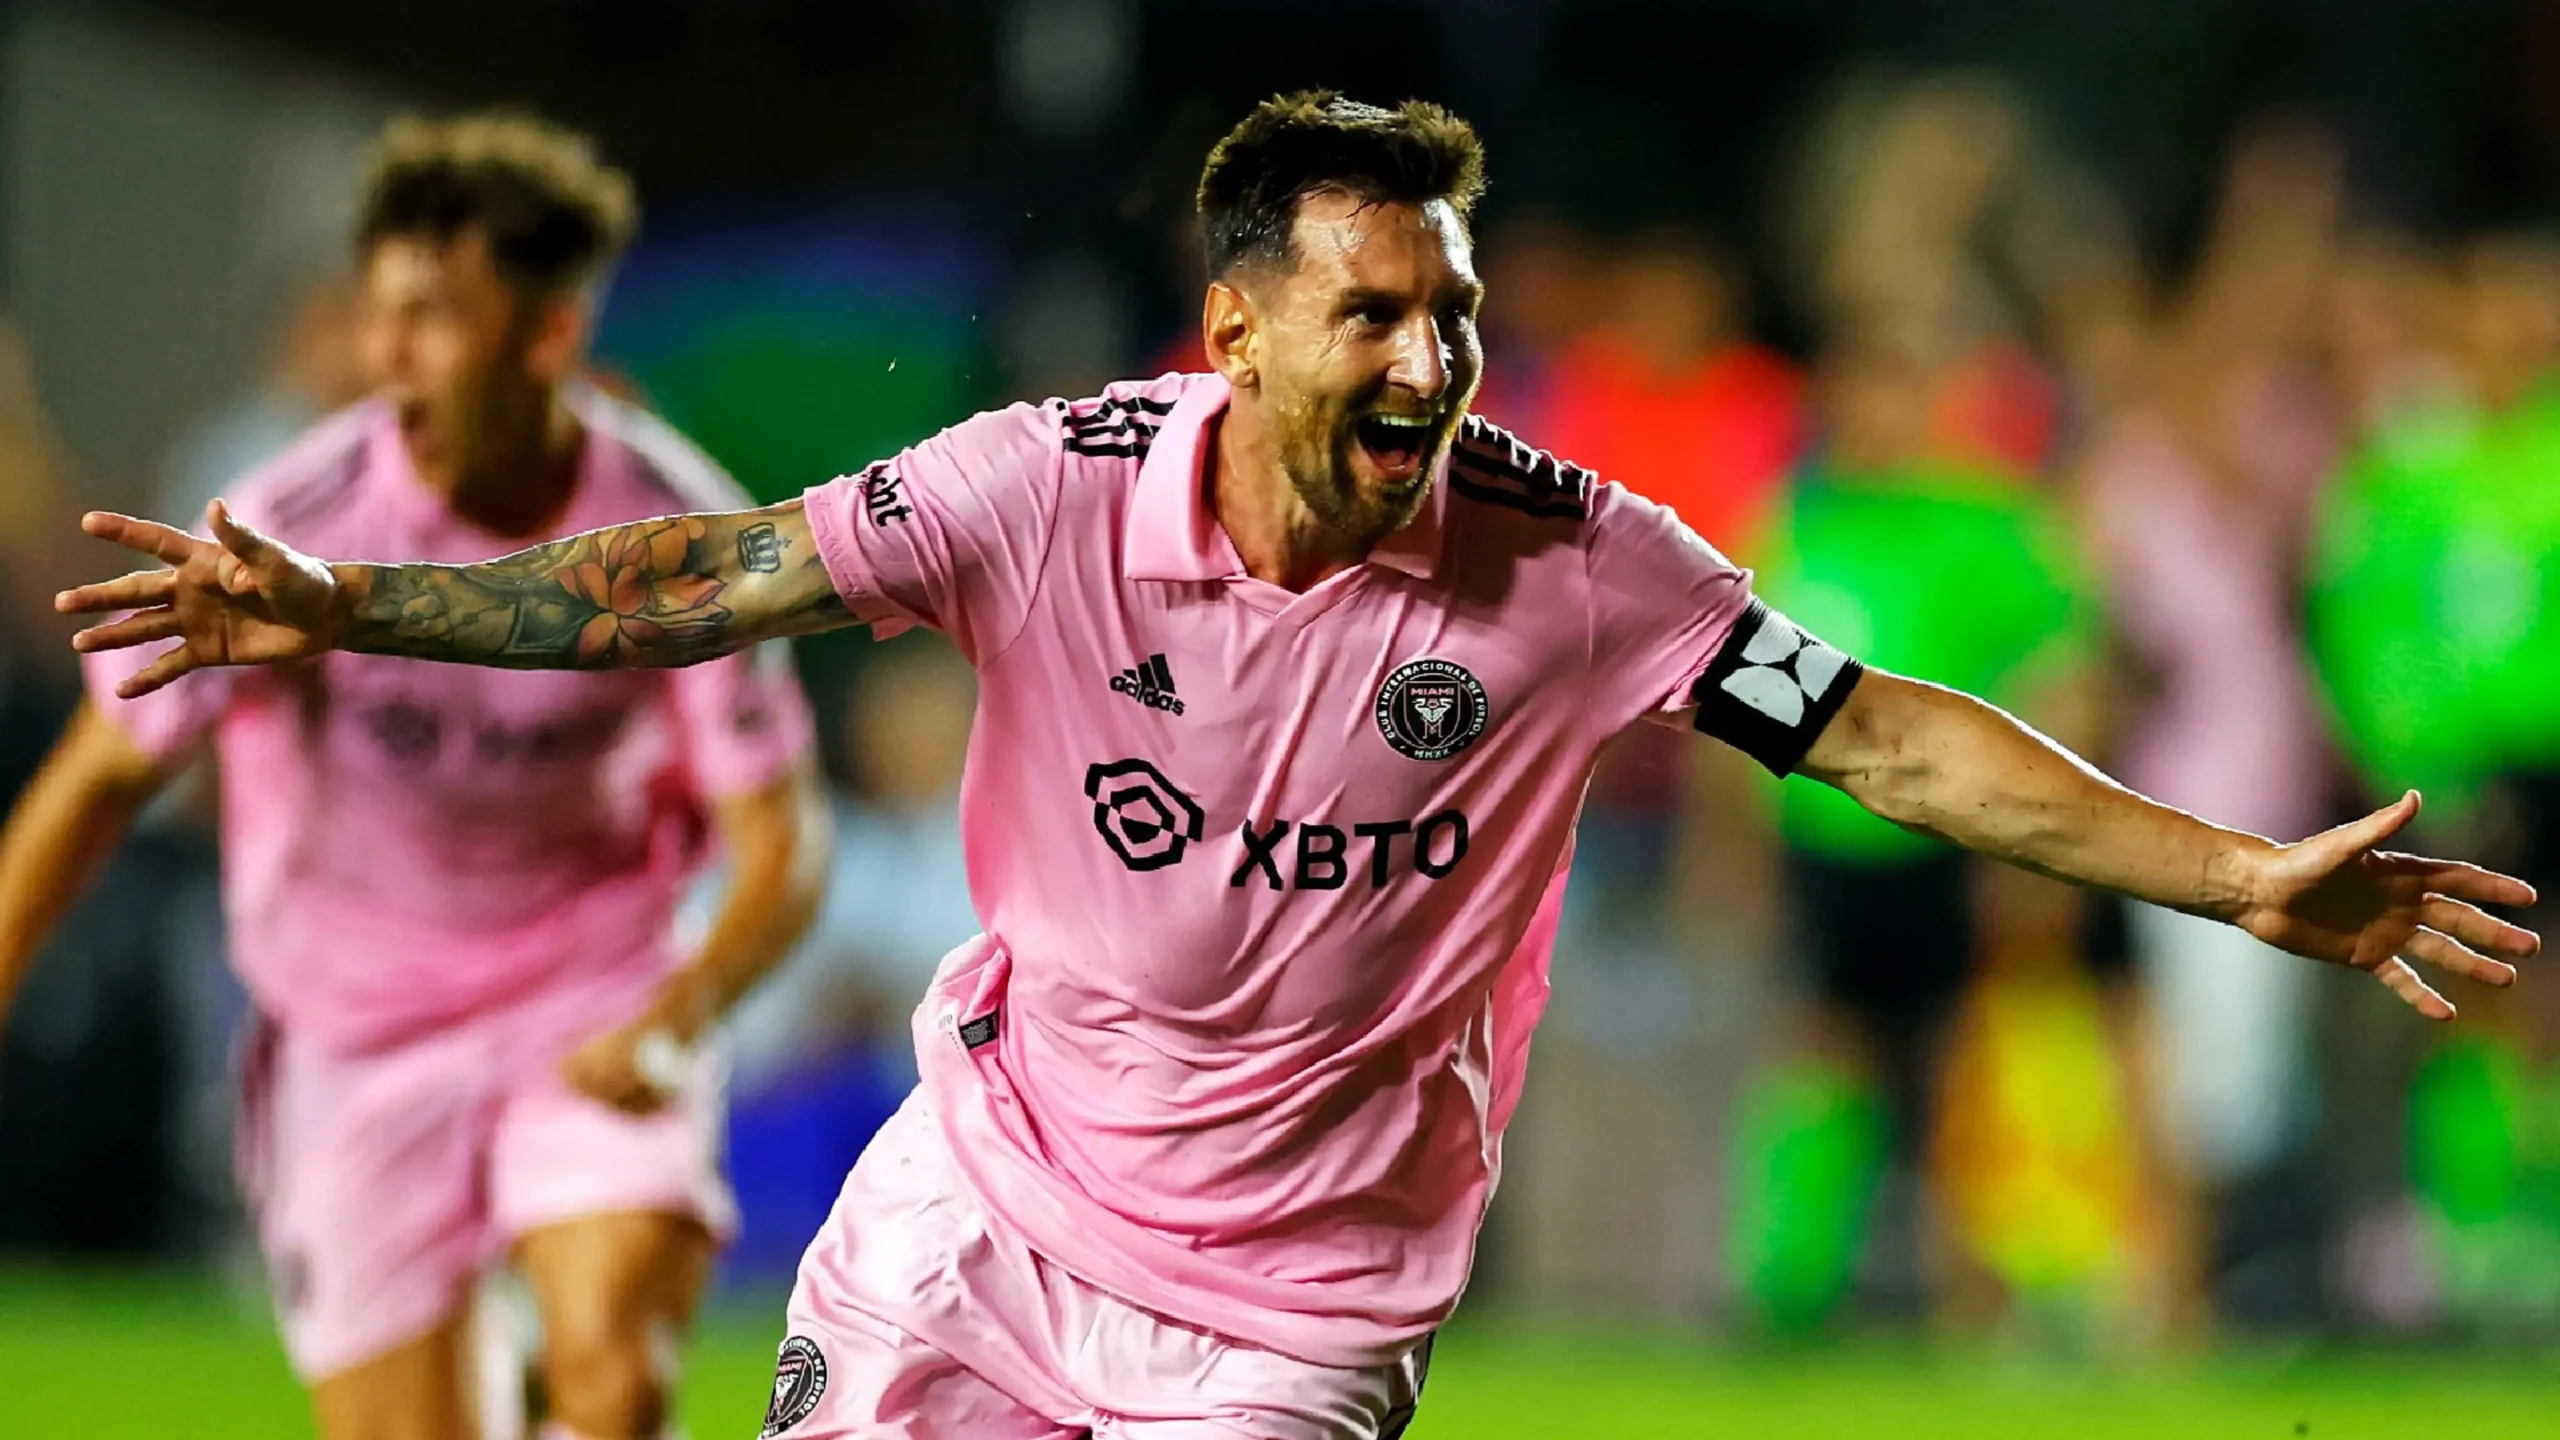 BBC Report: Lionel Messi has been nominated for the MLS MVP award after playing four games for Inter Miami…